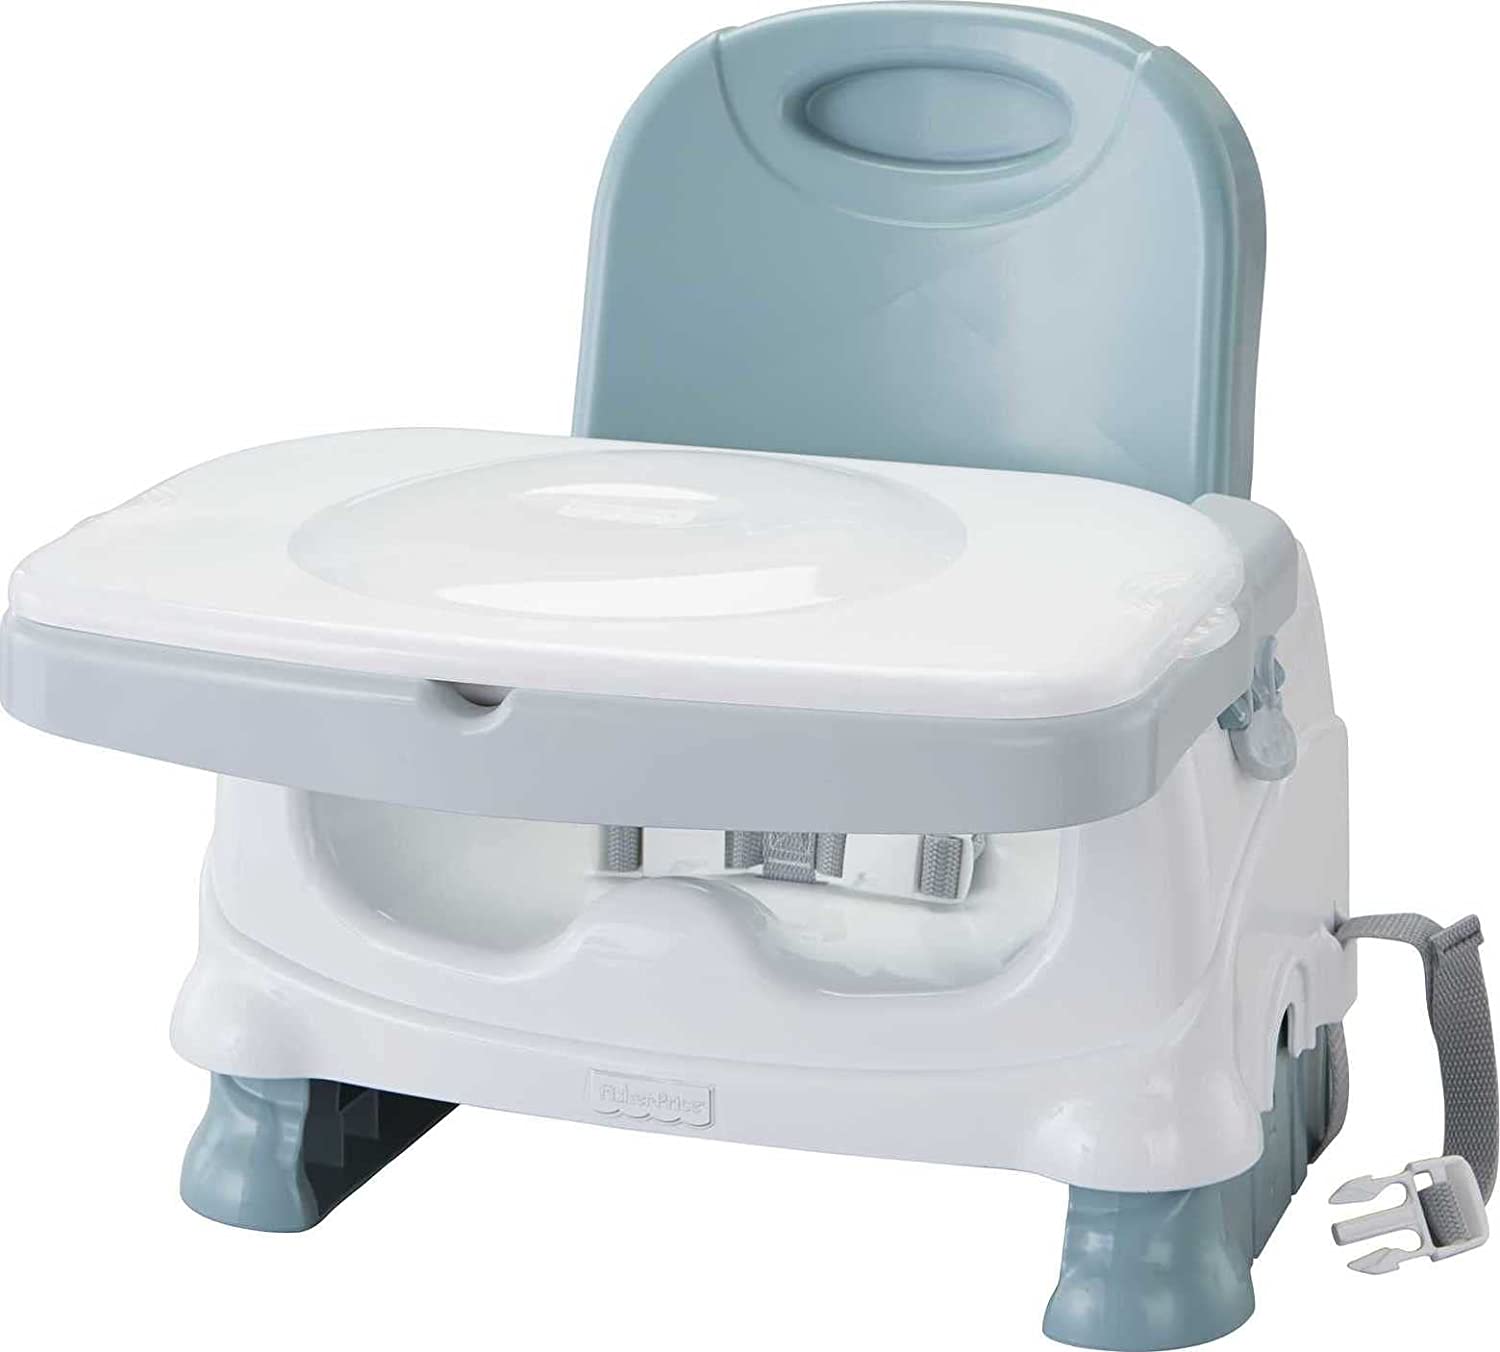 Fisher-Price Healthy Care Deluxe Booster Seat - with Dishwasher safe feeding tray